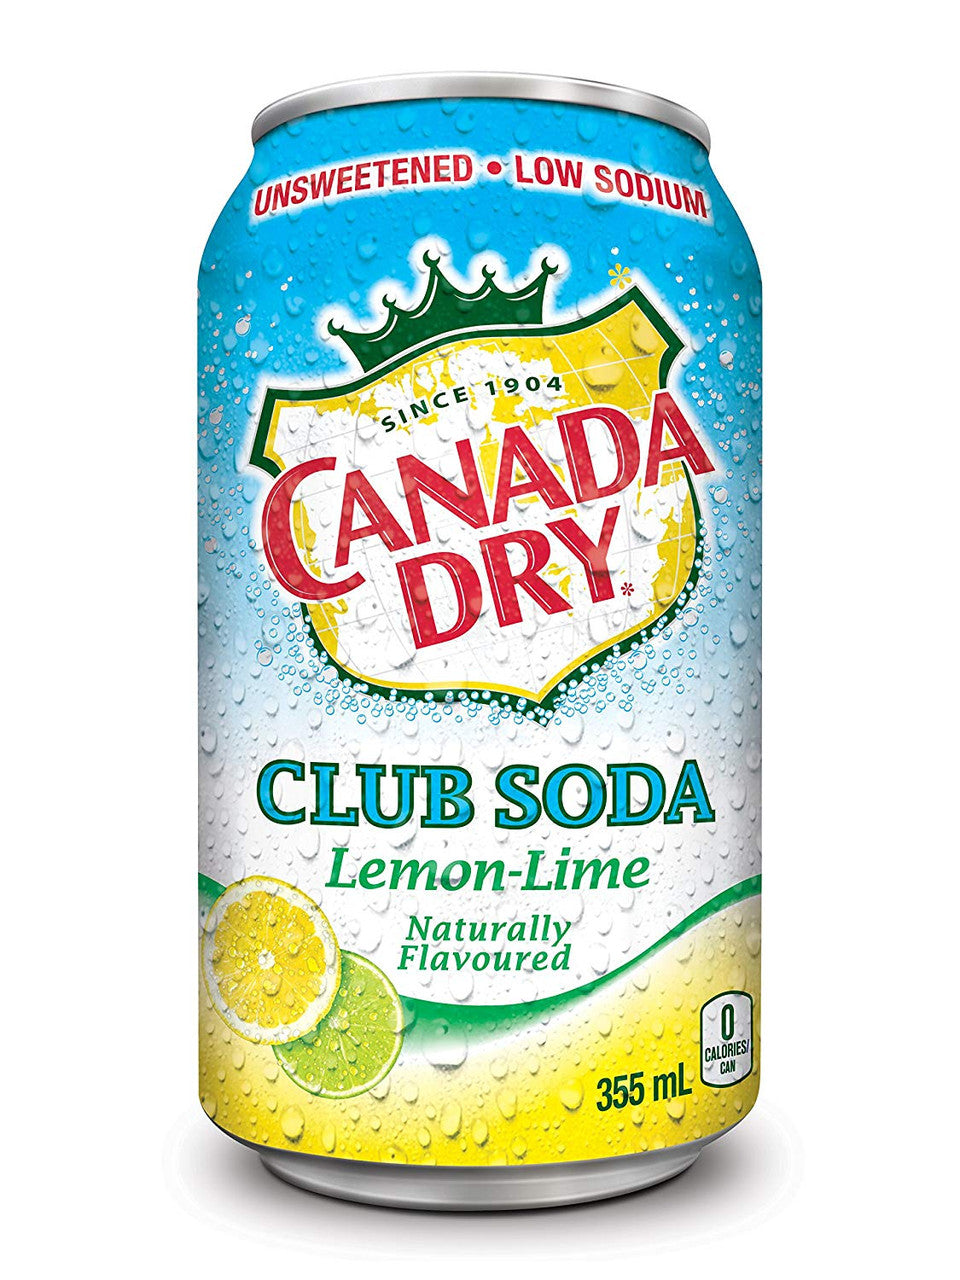 Canada Dry Club Soda Lemon Lime, 355 mL cans, 12ct, (Imported from Canada) - image 3 of 3